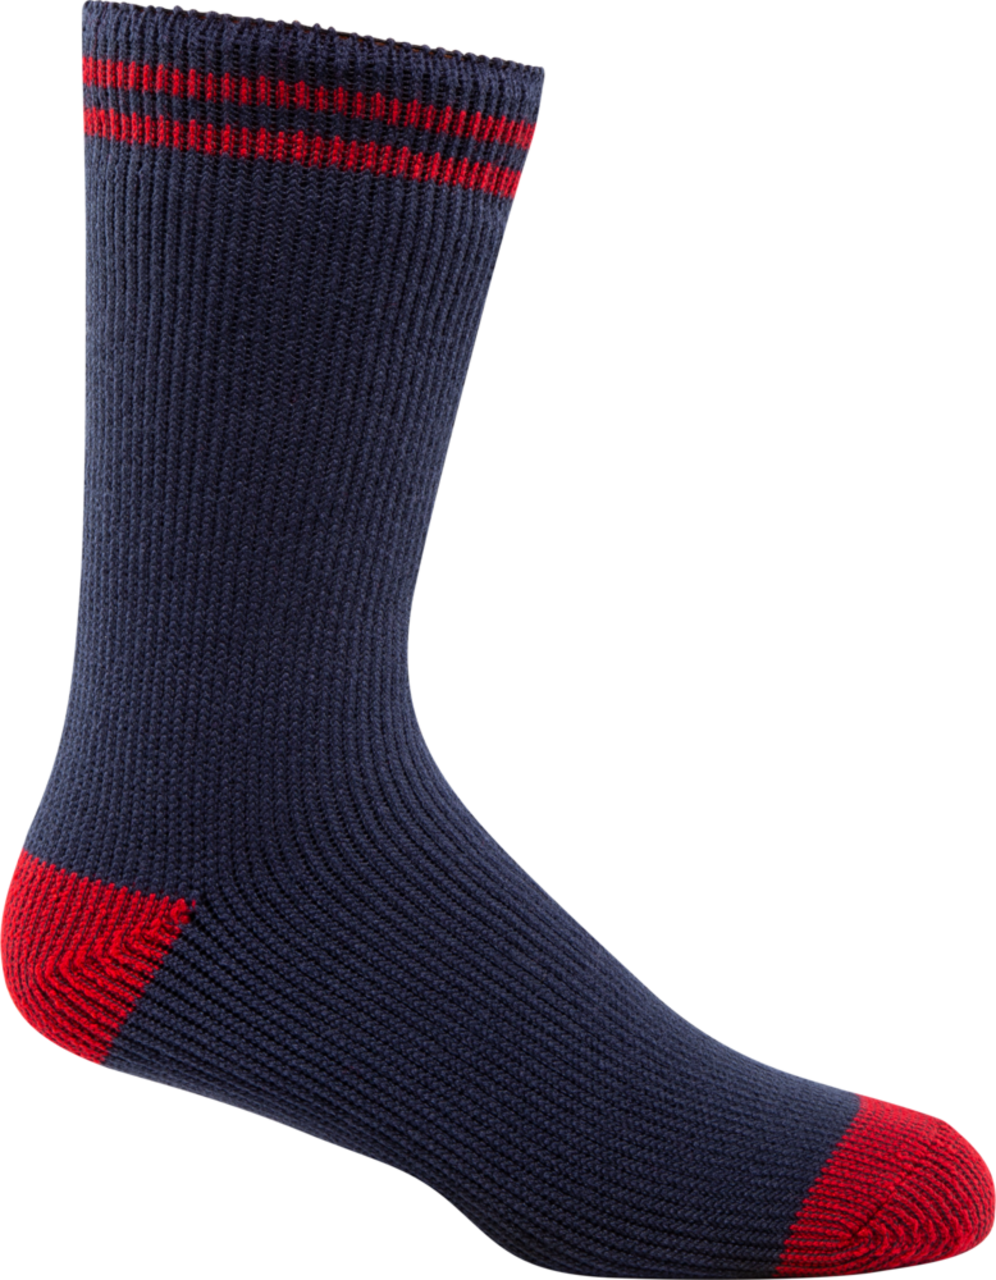 CHAUSSETTES THERMIQUES ICE DIAMOND XS150